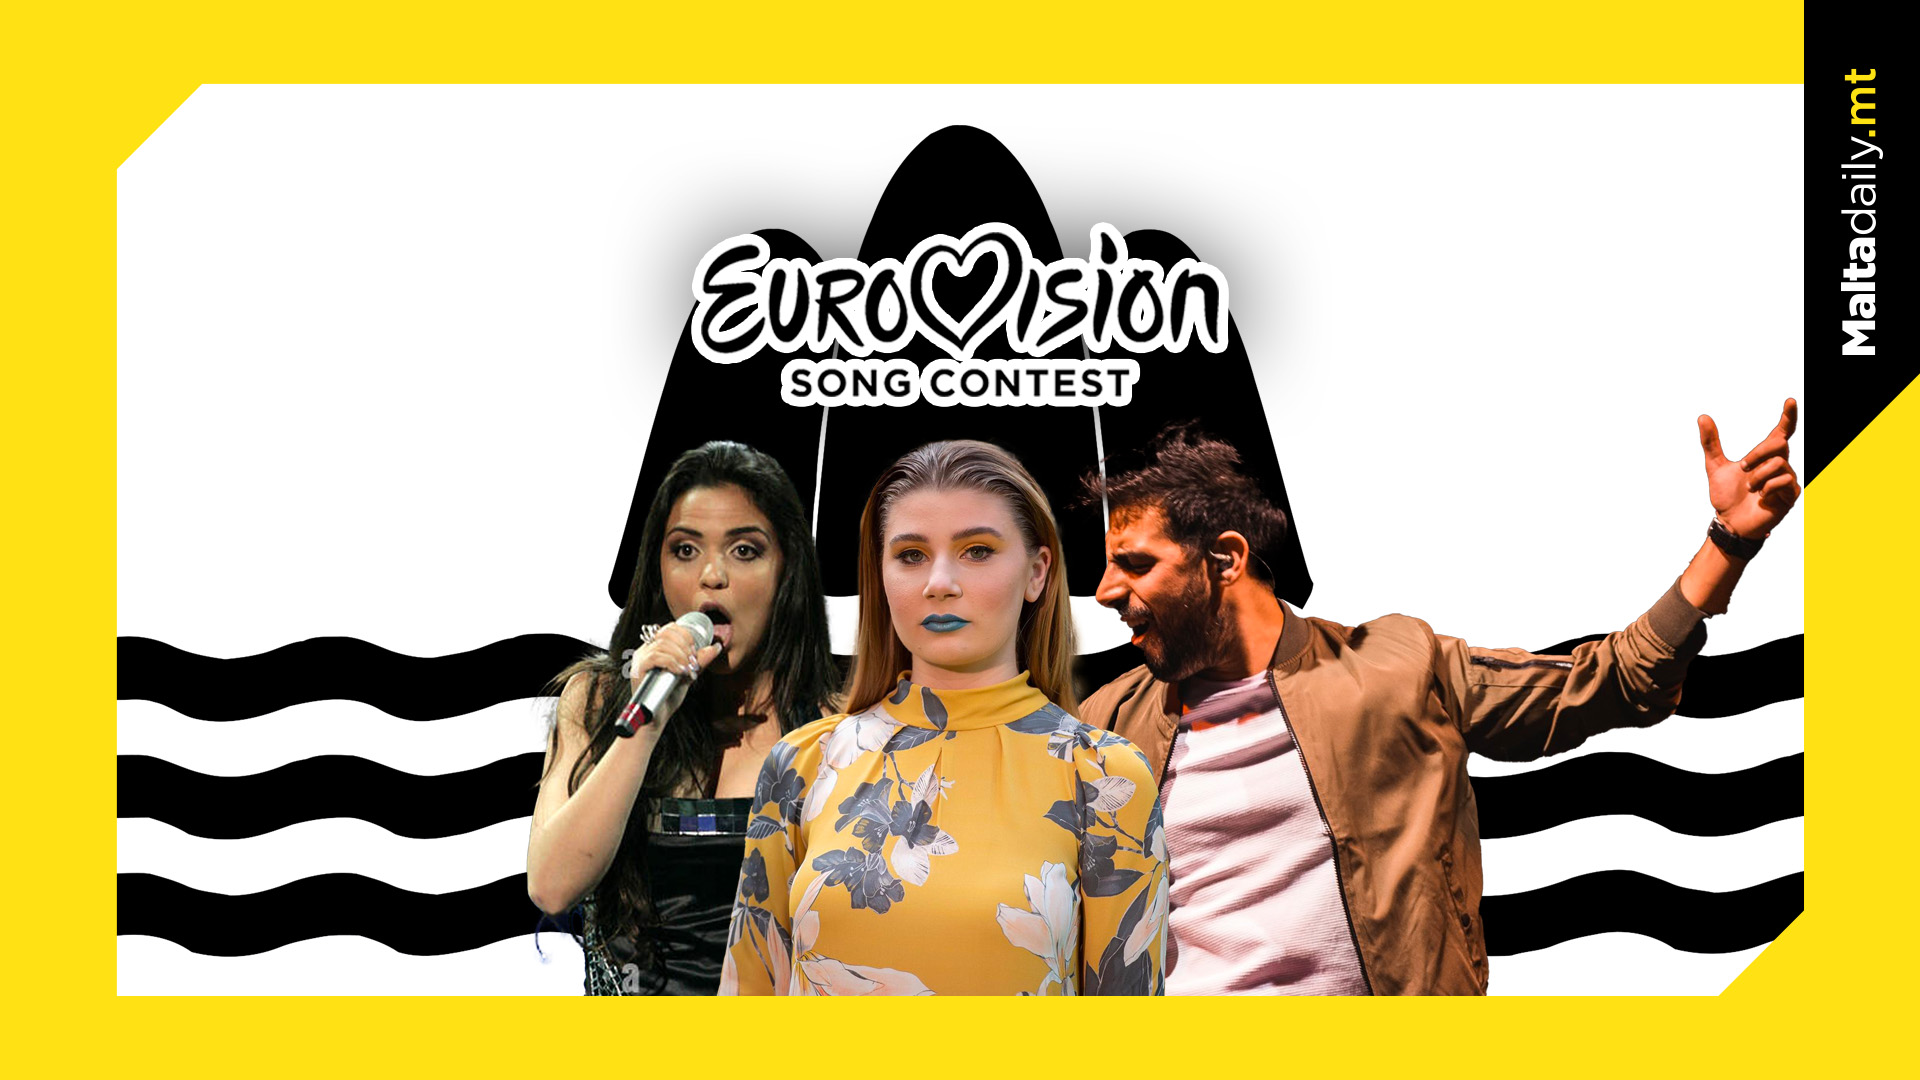 Just Bants: Gozo should get its independence so we double our Eurovision chances